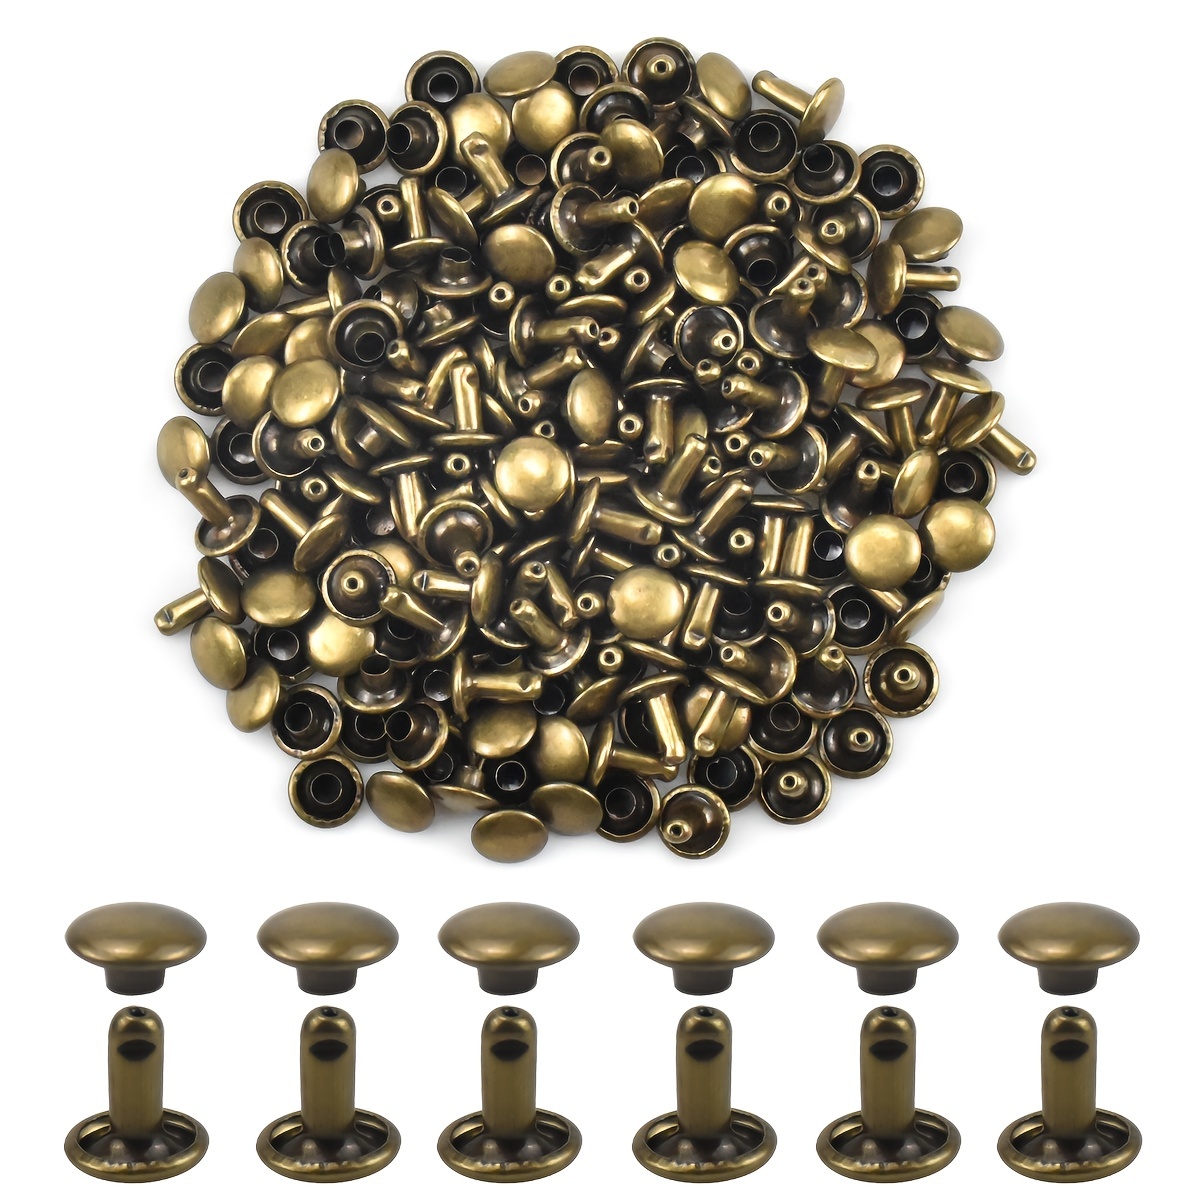 100Pcs/Set 6mm-12mm Metal Round Double Cap Rivets Studs Nail For